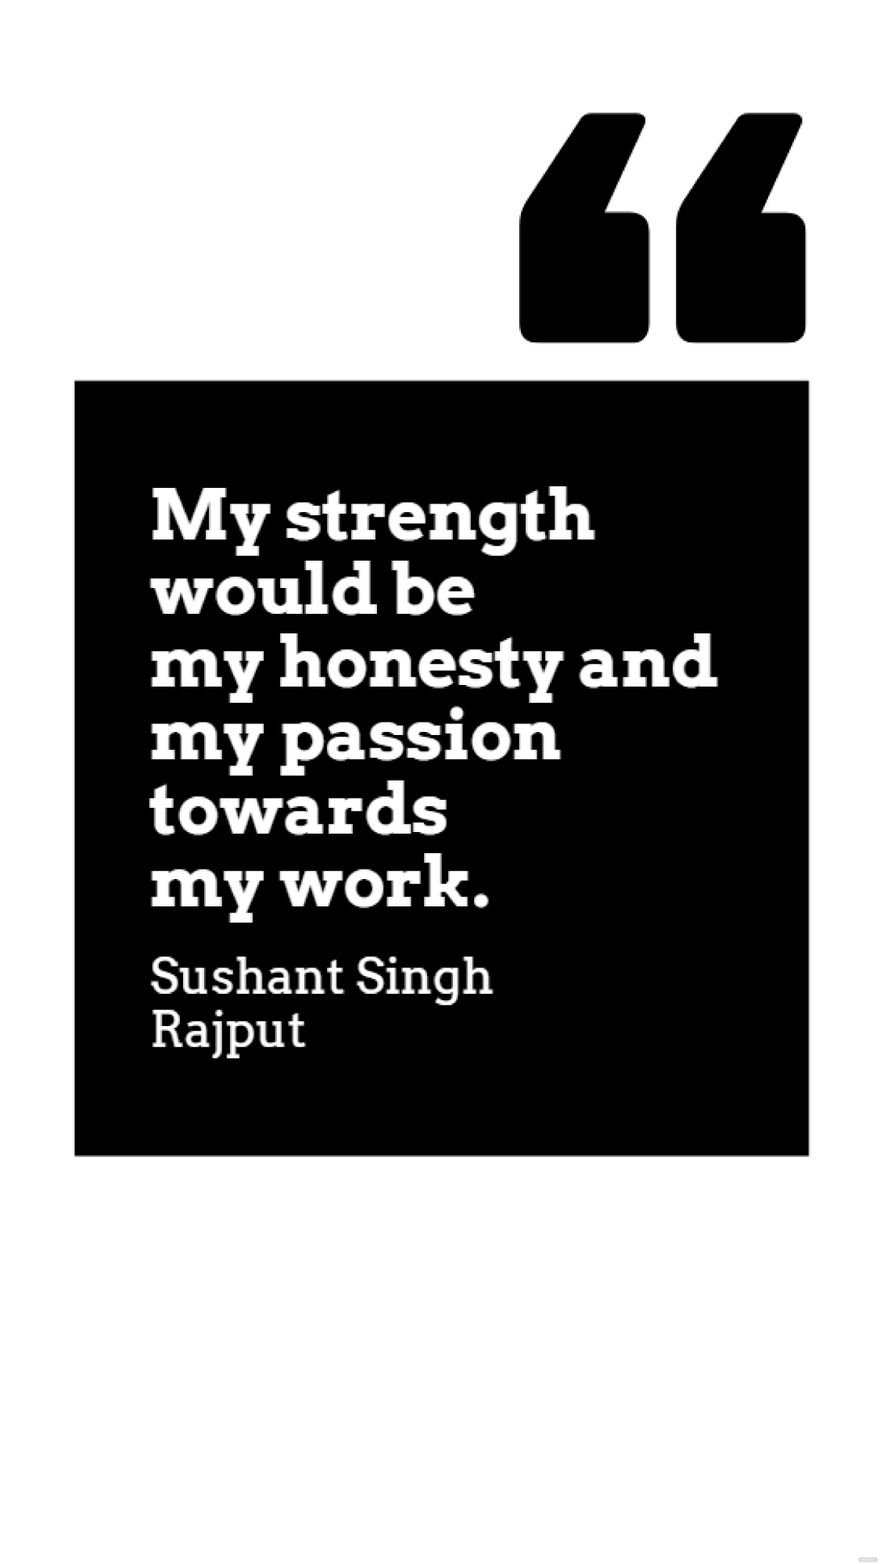 Free Sushant Singh Rajput - My strength would be my honesty and my passion towards my work. in JPG